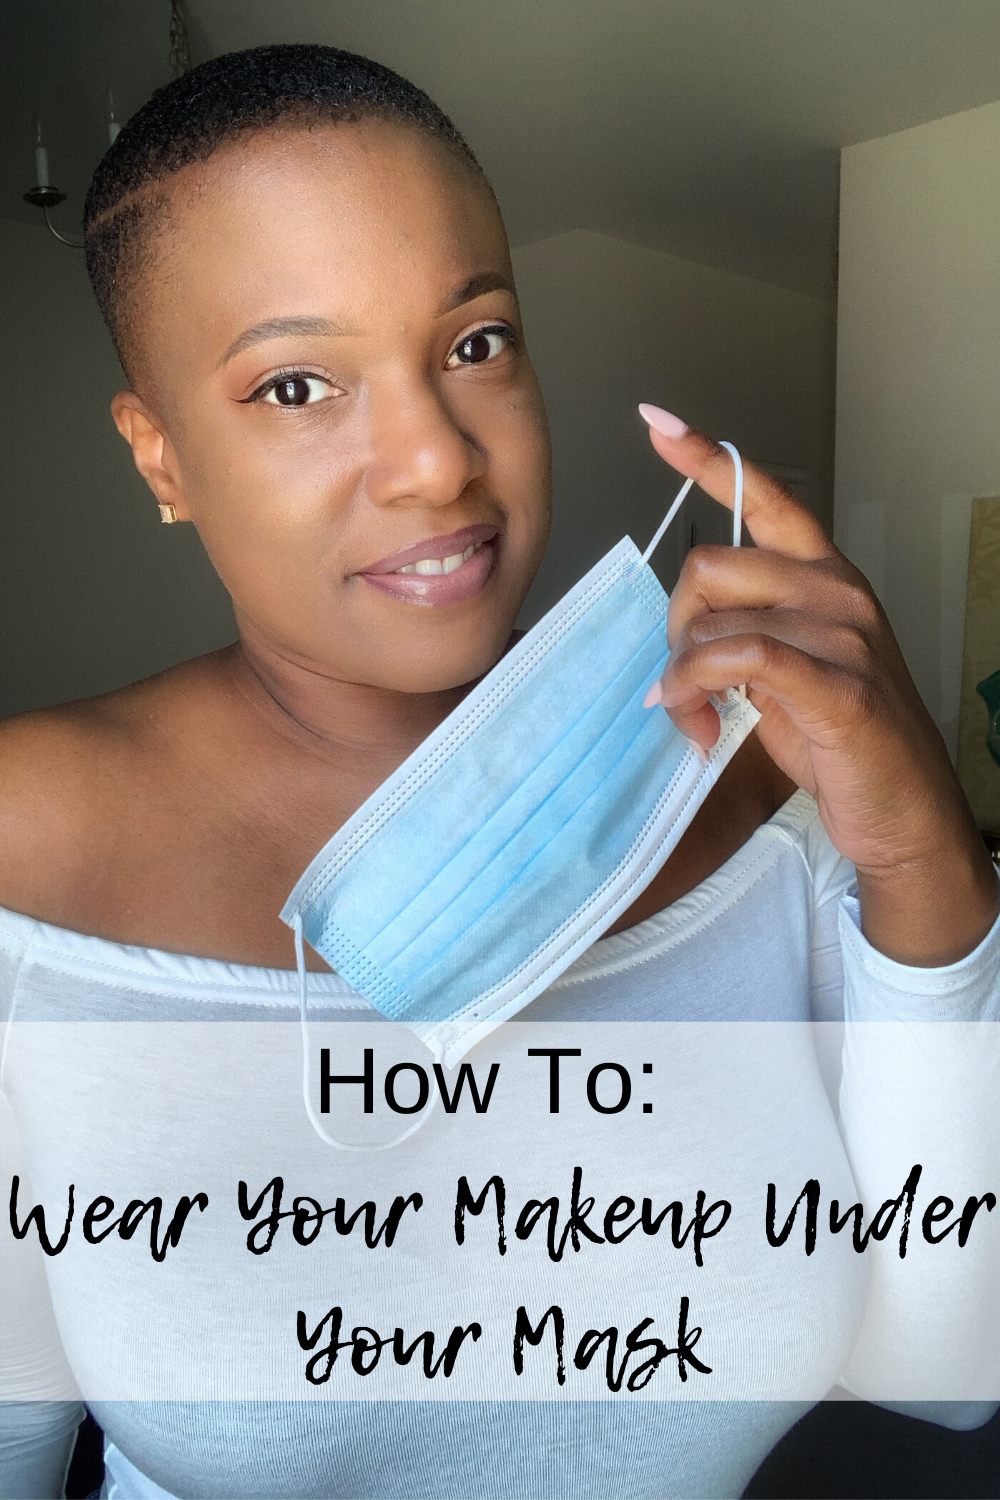 How To Wear Your Makeup Under Your Mask